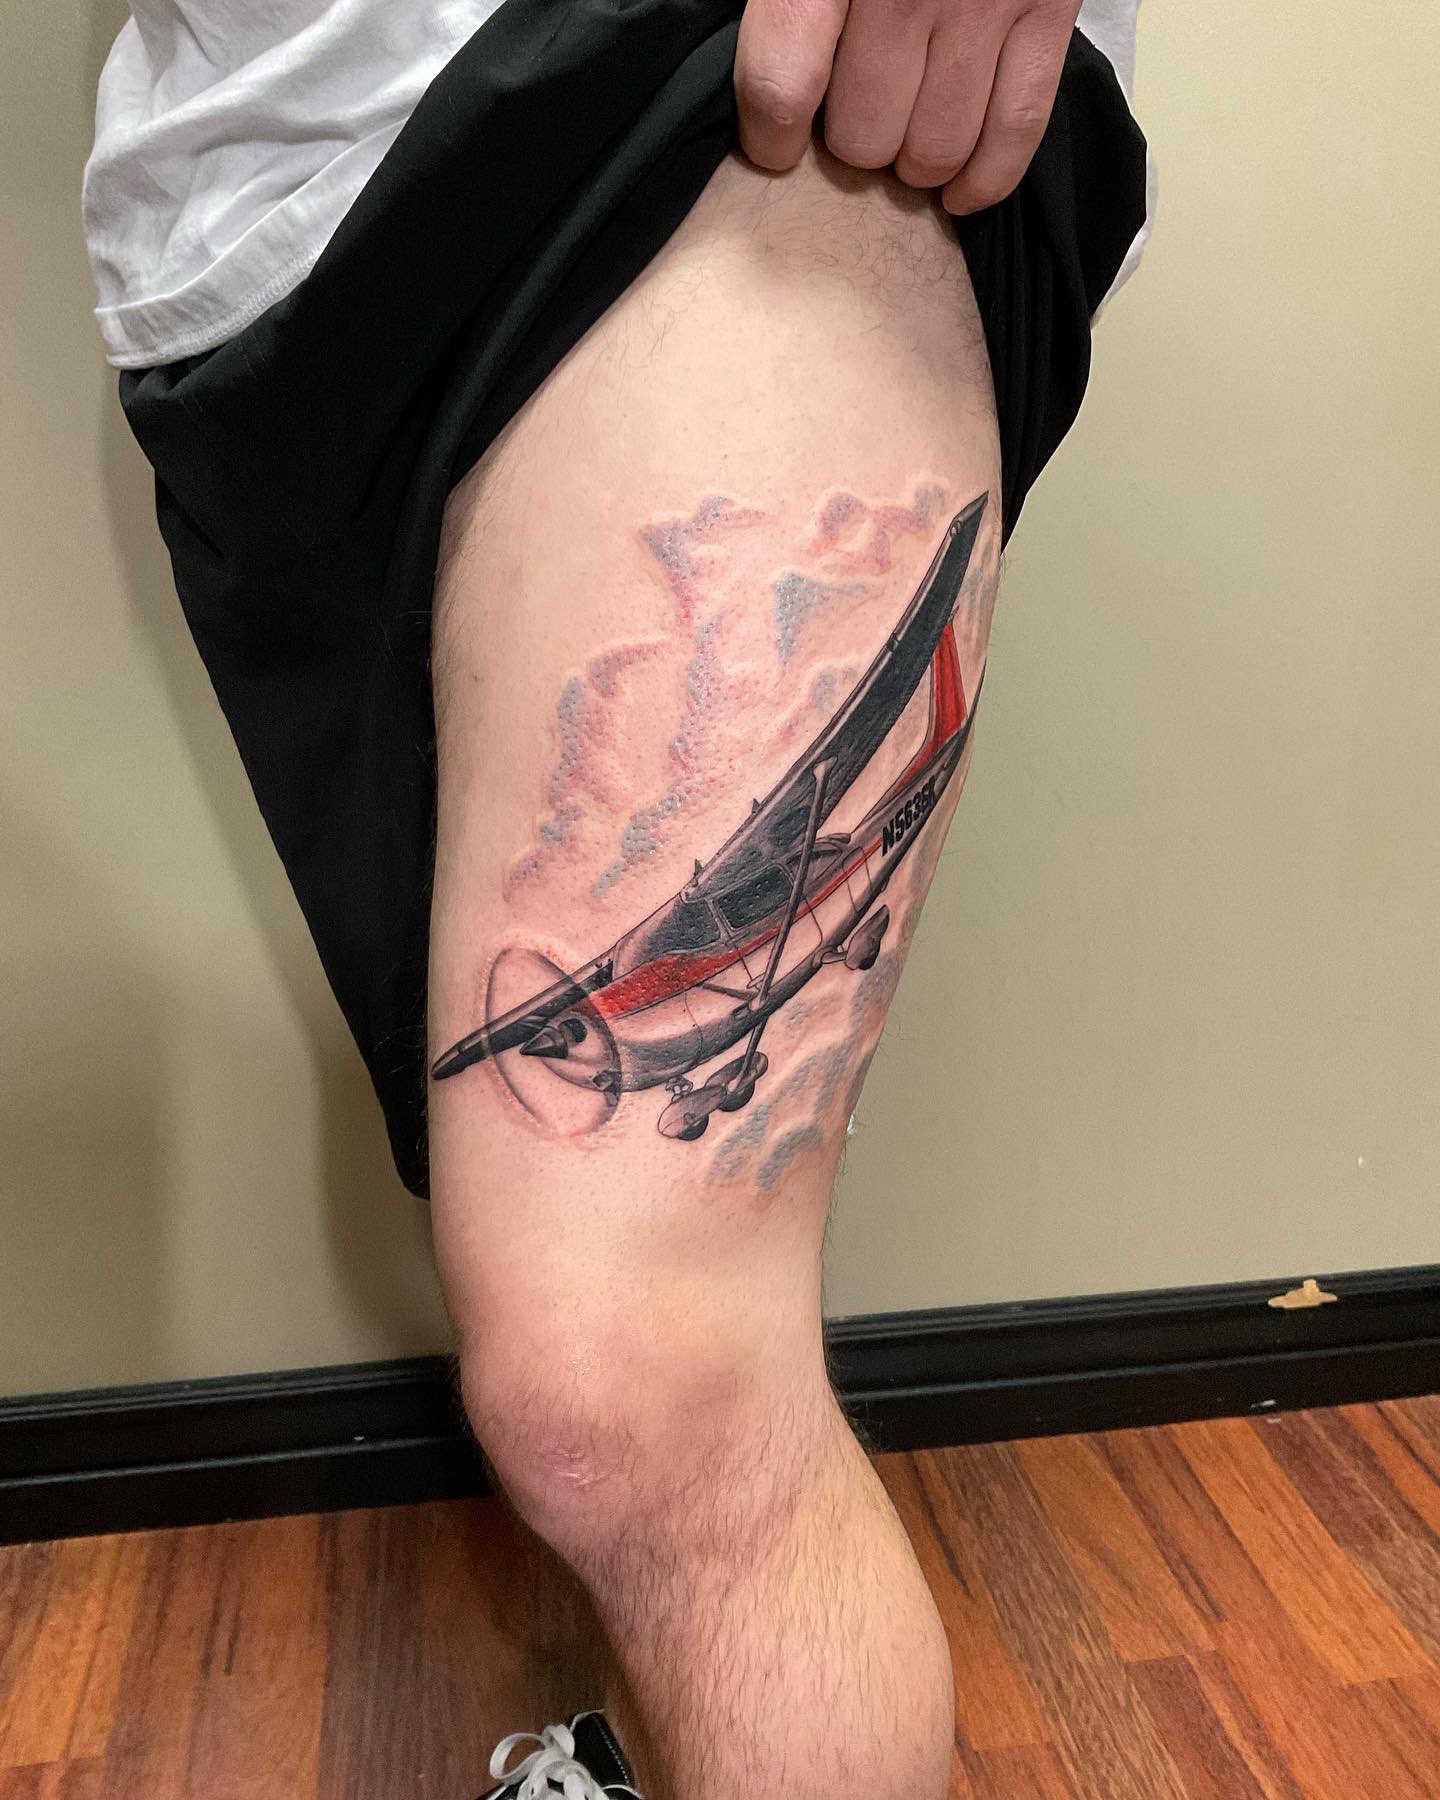 Lucky Bamboo Tattoo on X: Check out this LOTR tattoo! This tattoo